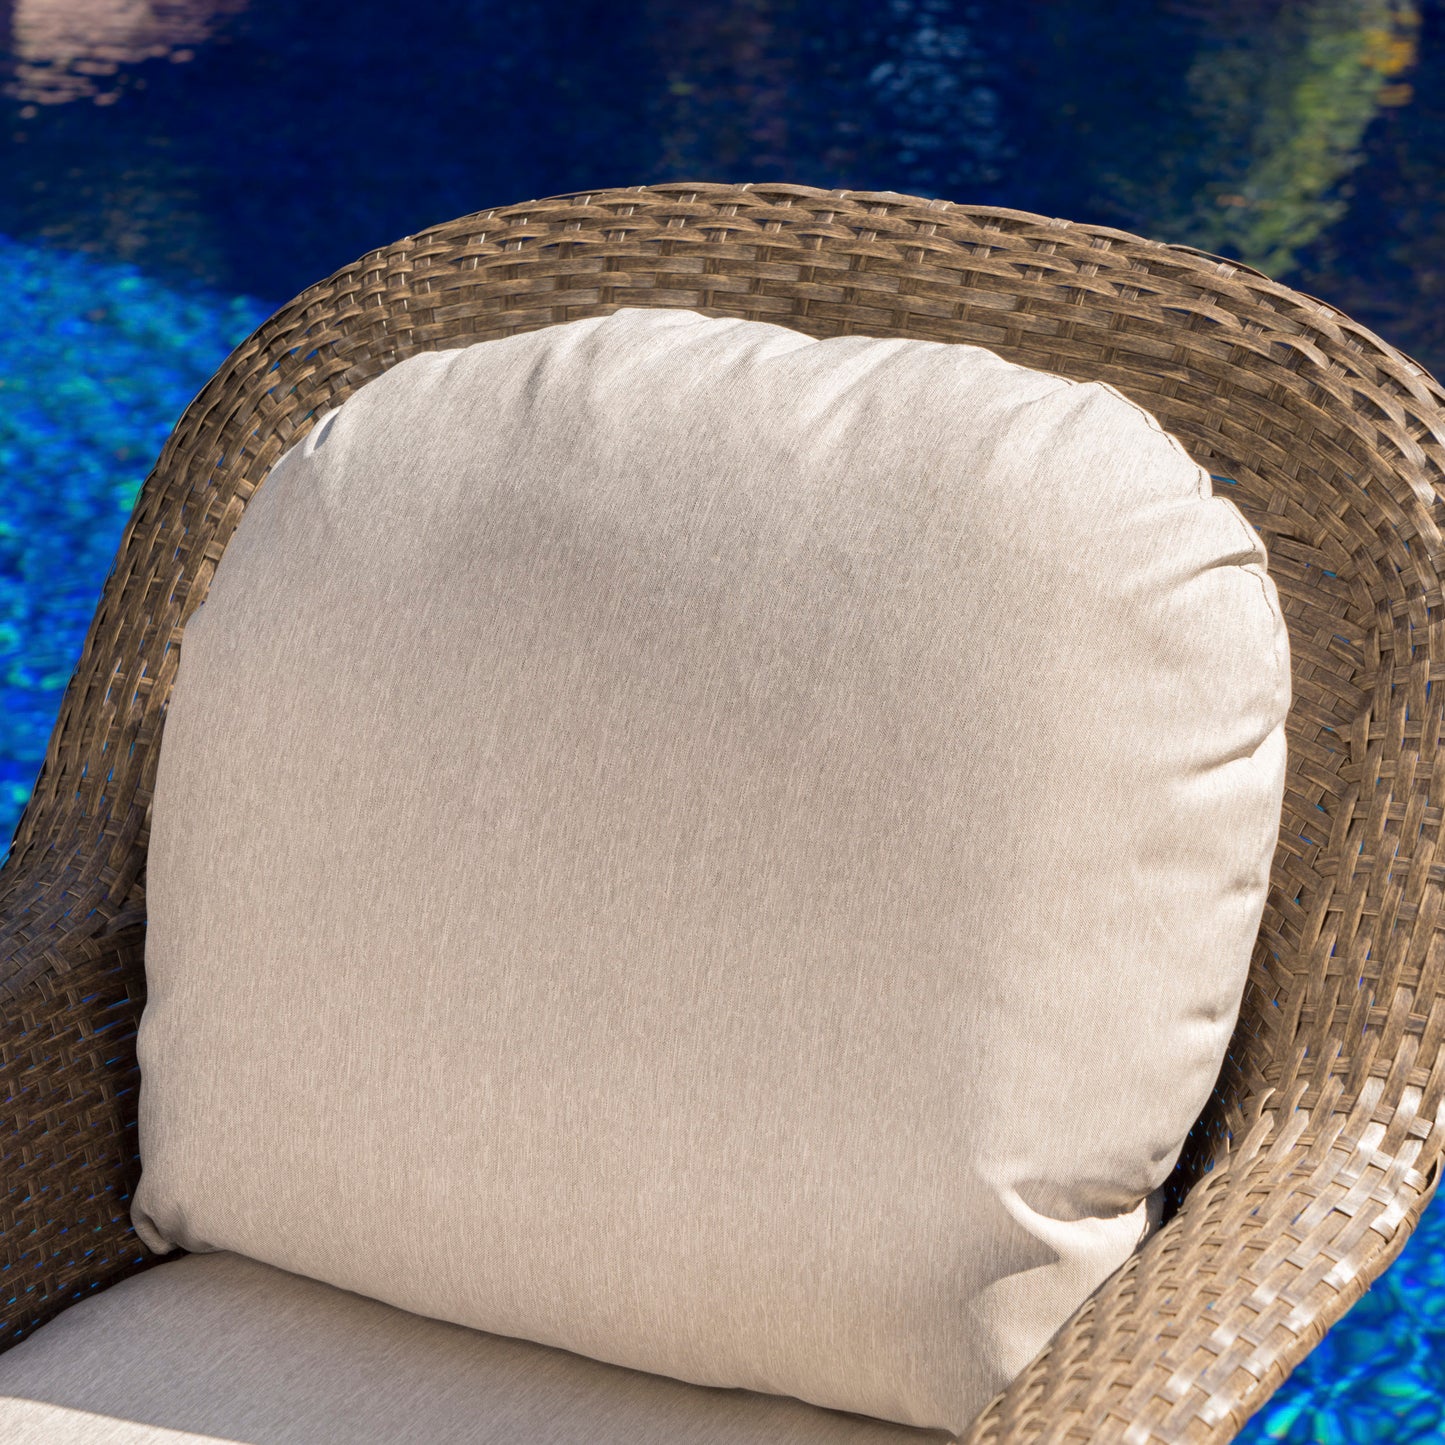 Linsten Outdoor Wicker Swivel Club Chairs with Water Resistant Cushions